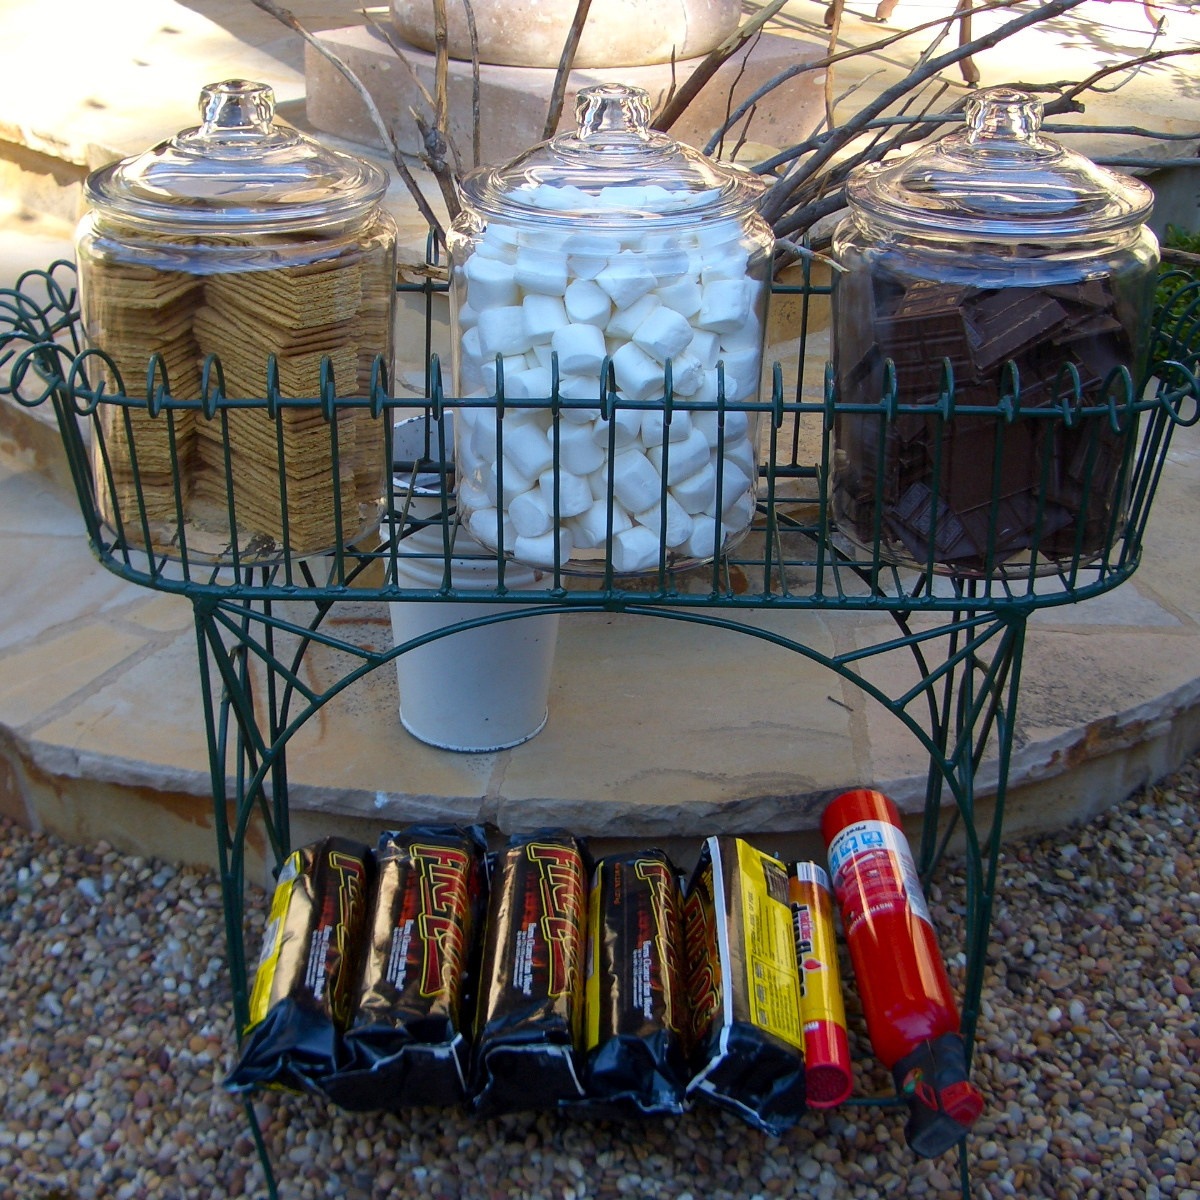 Backyard Graduation Party Decorating Ideas
 20 WAYS TO CELEBRATE NATIONAL S’MORES DAY